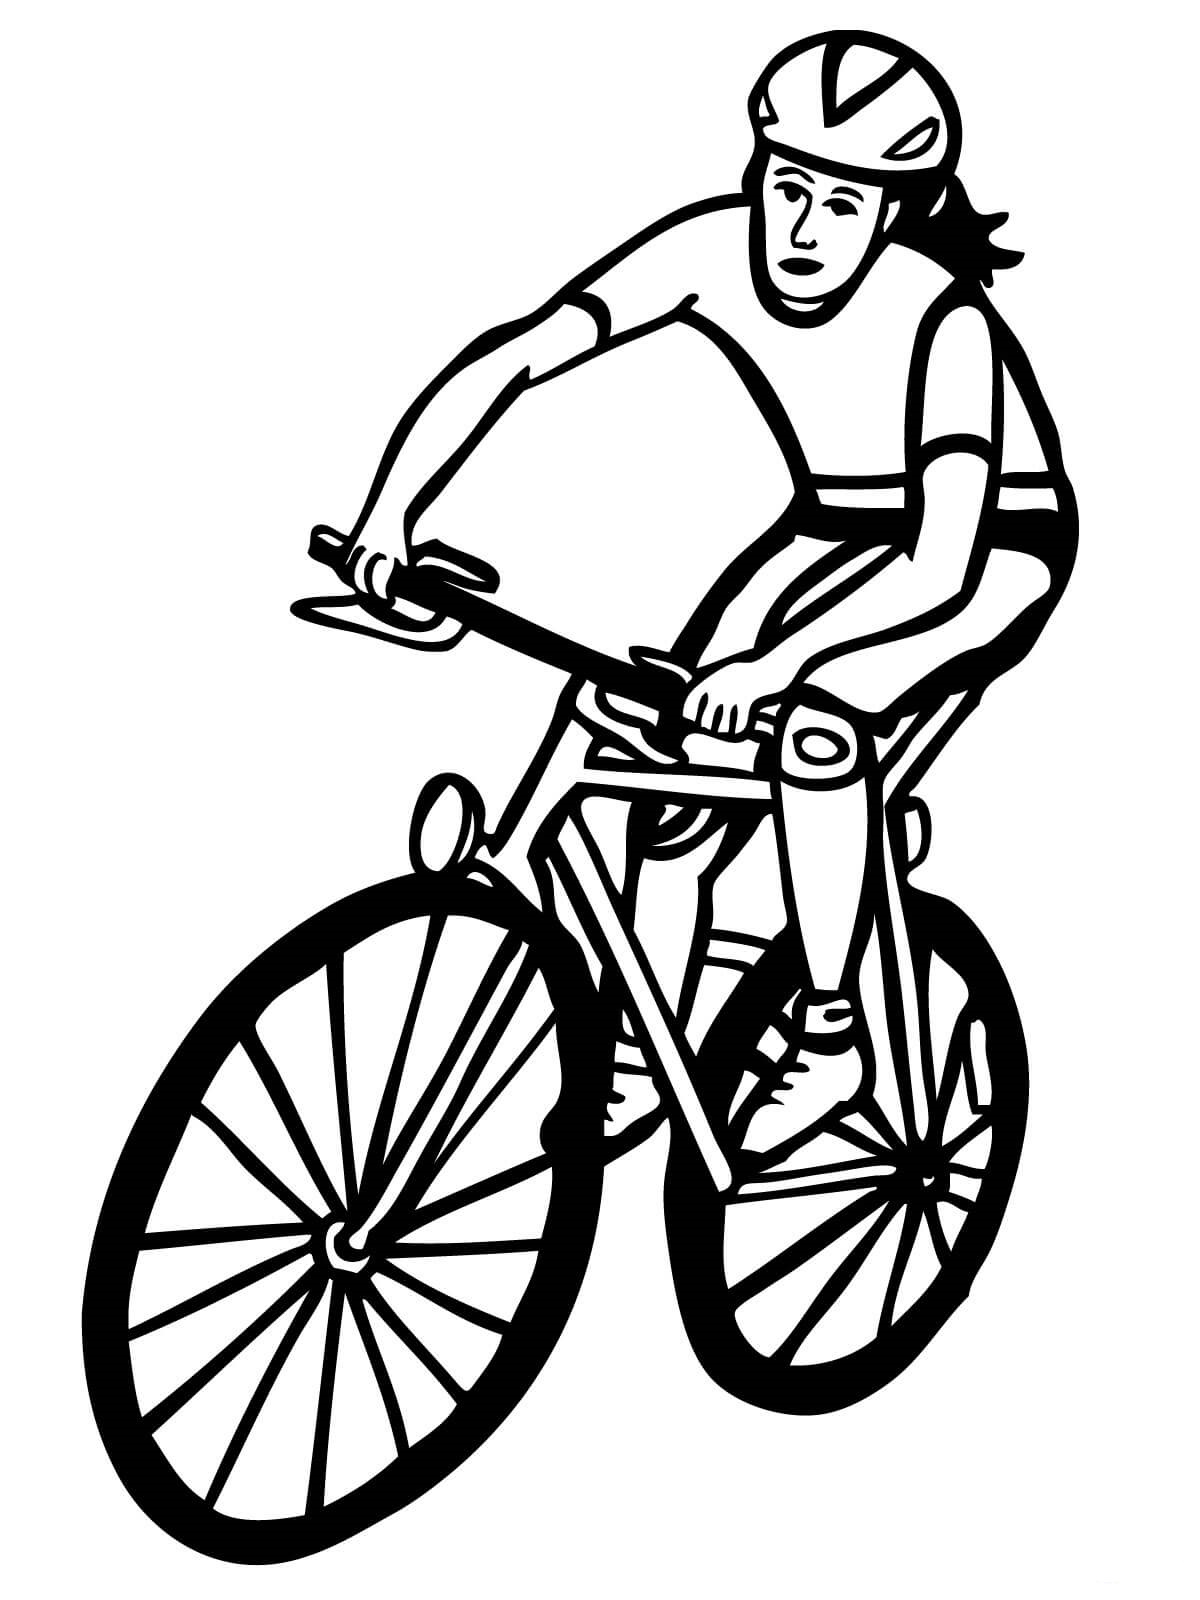 Woman Cyclist Bicycle